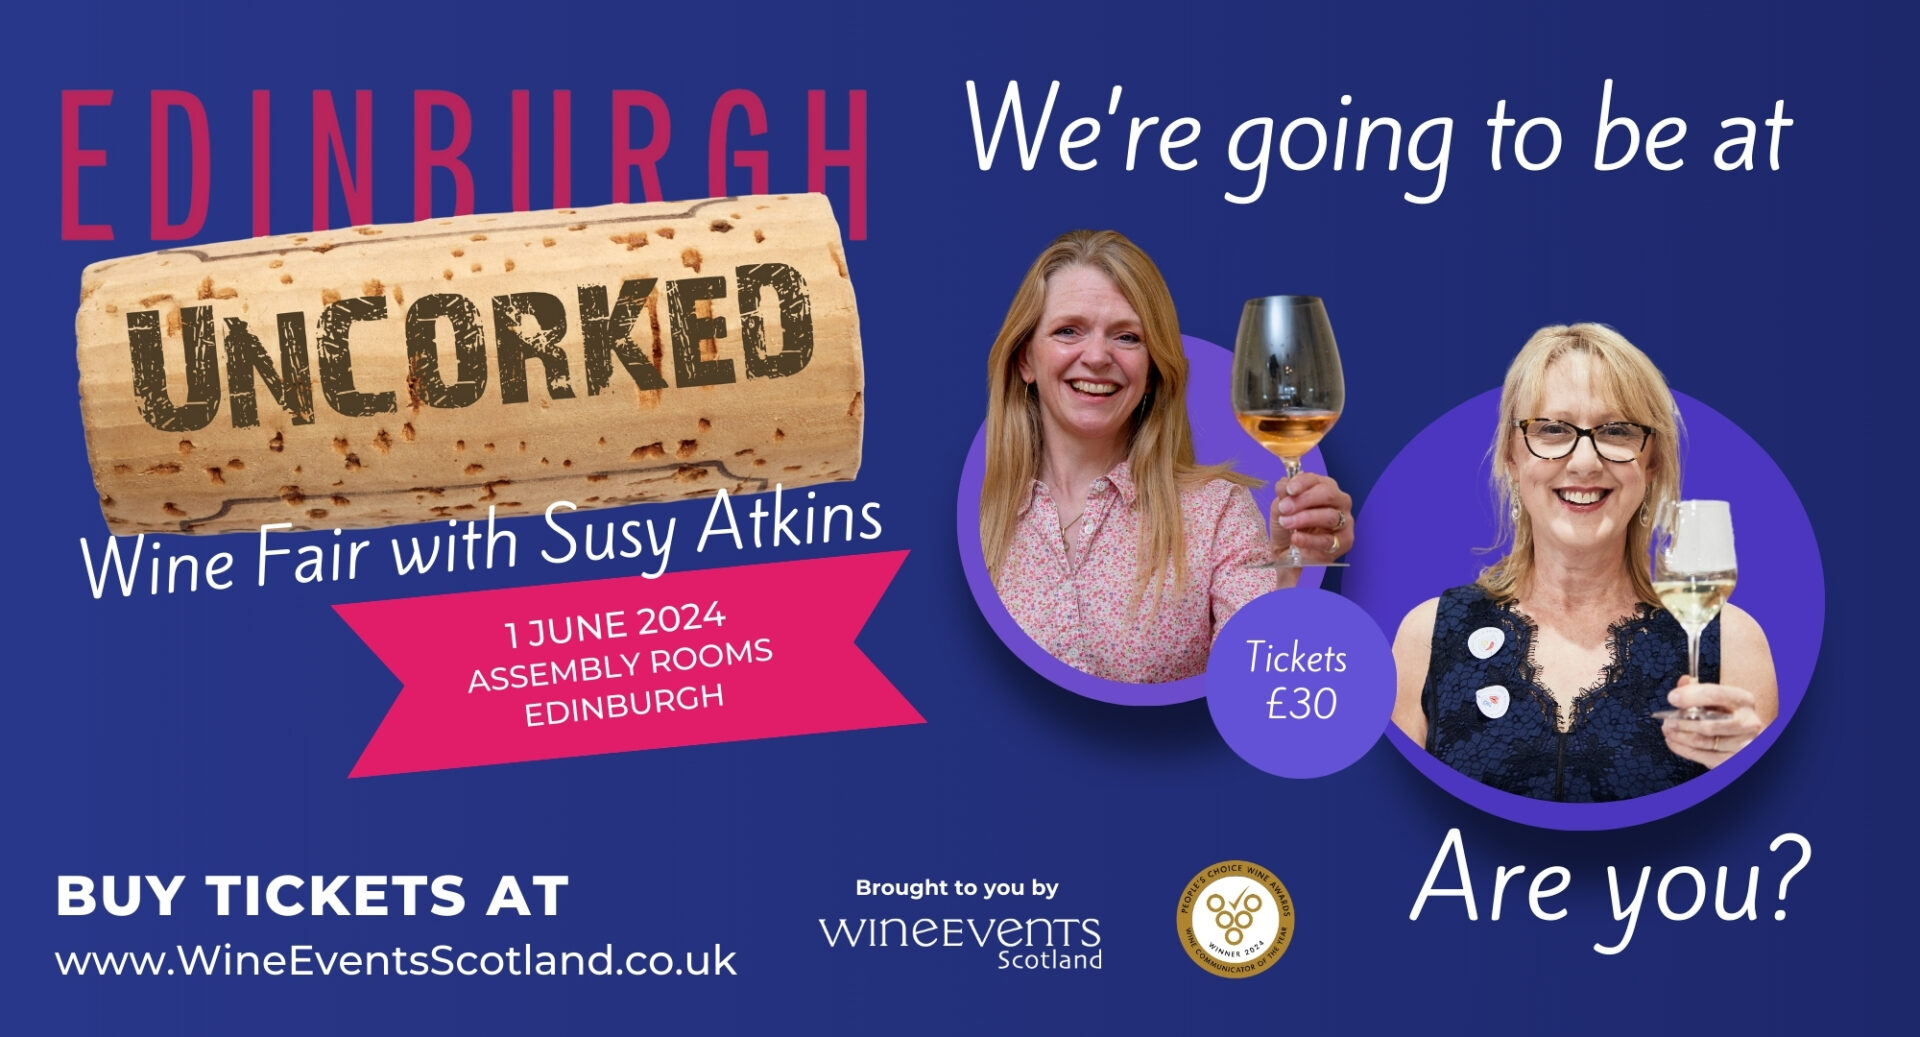 Poster advertising the Edinburgh uncorked event with image of Susy Atkins